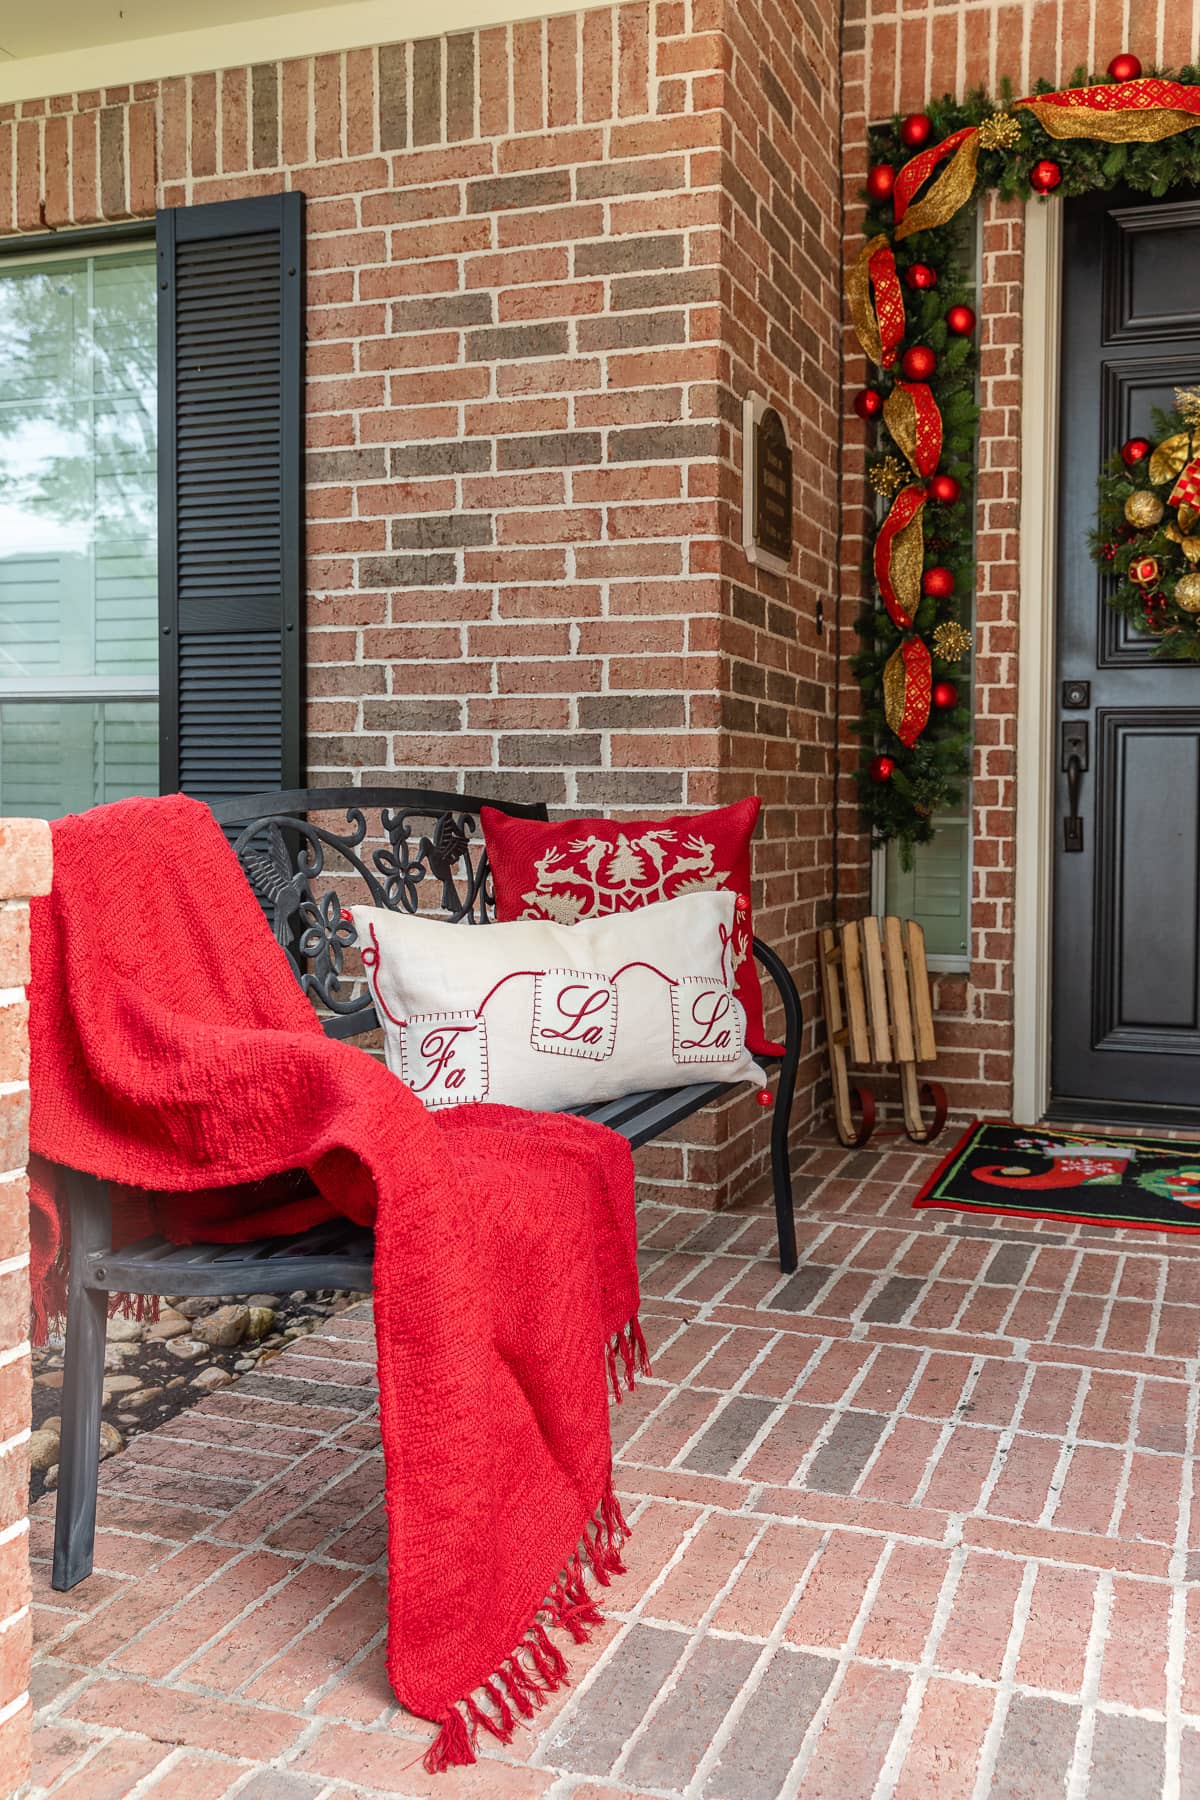 Christmas porch decorations with throw blanket and throw pillows placed on bench.